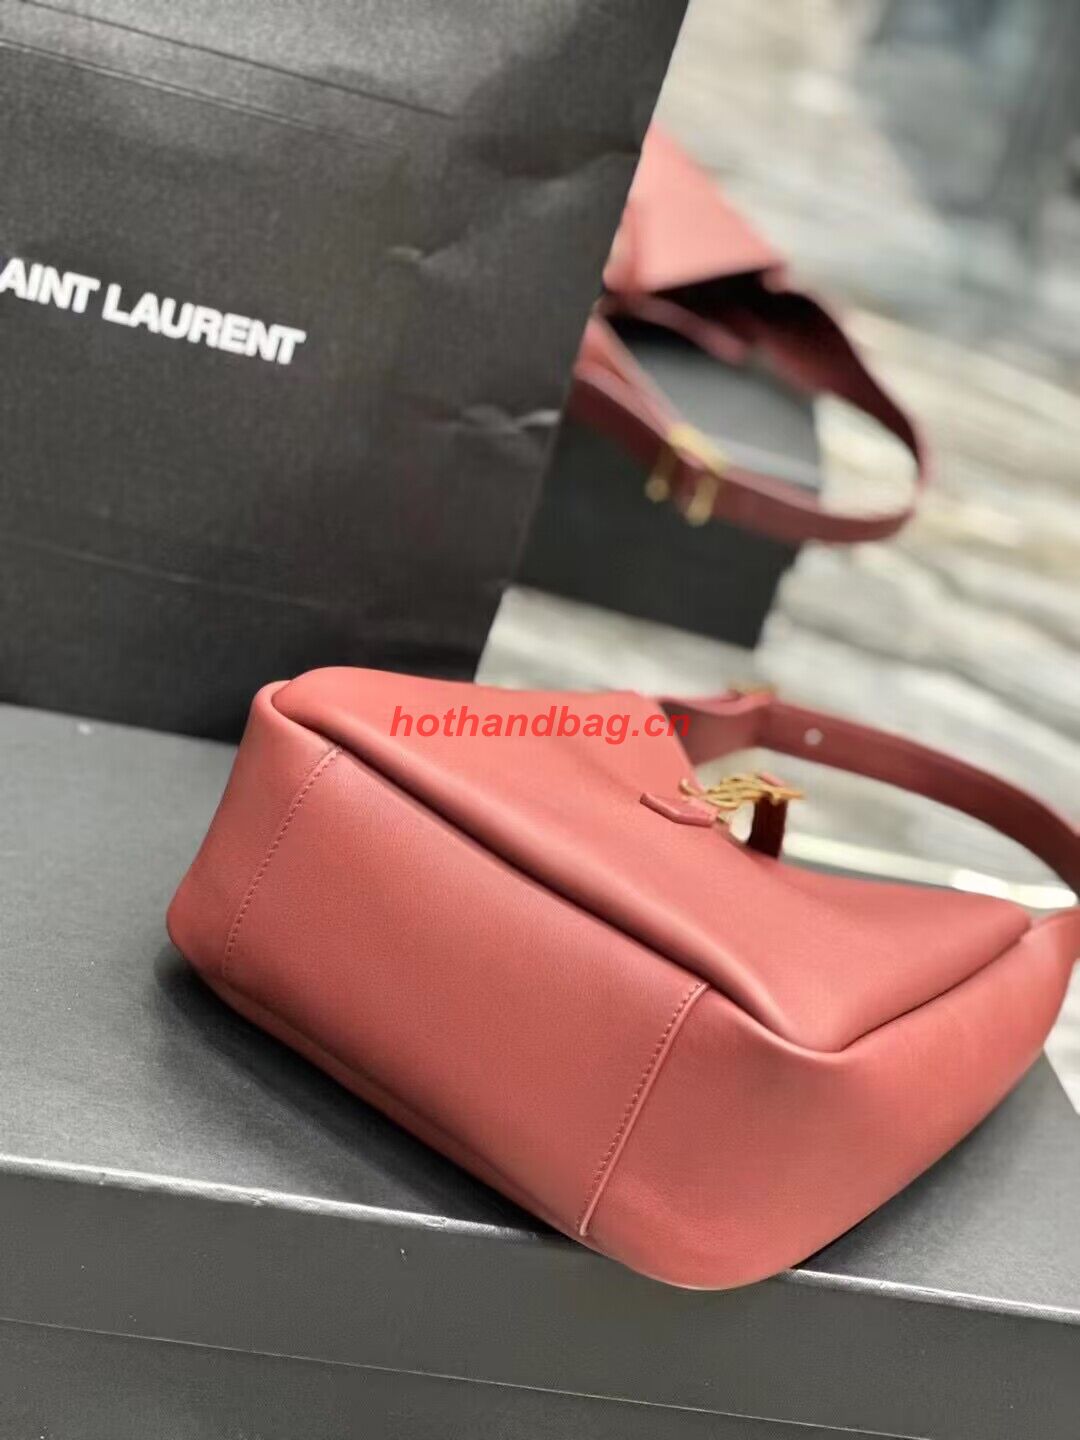 SAINT LAUREN LE 5 A 7 SOFT SMALL IN SMOOTH LEATHER 713938 ROUGE LEGION